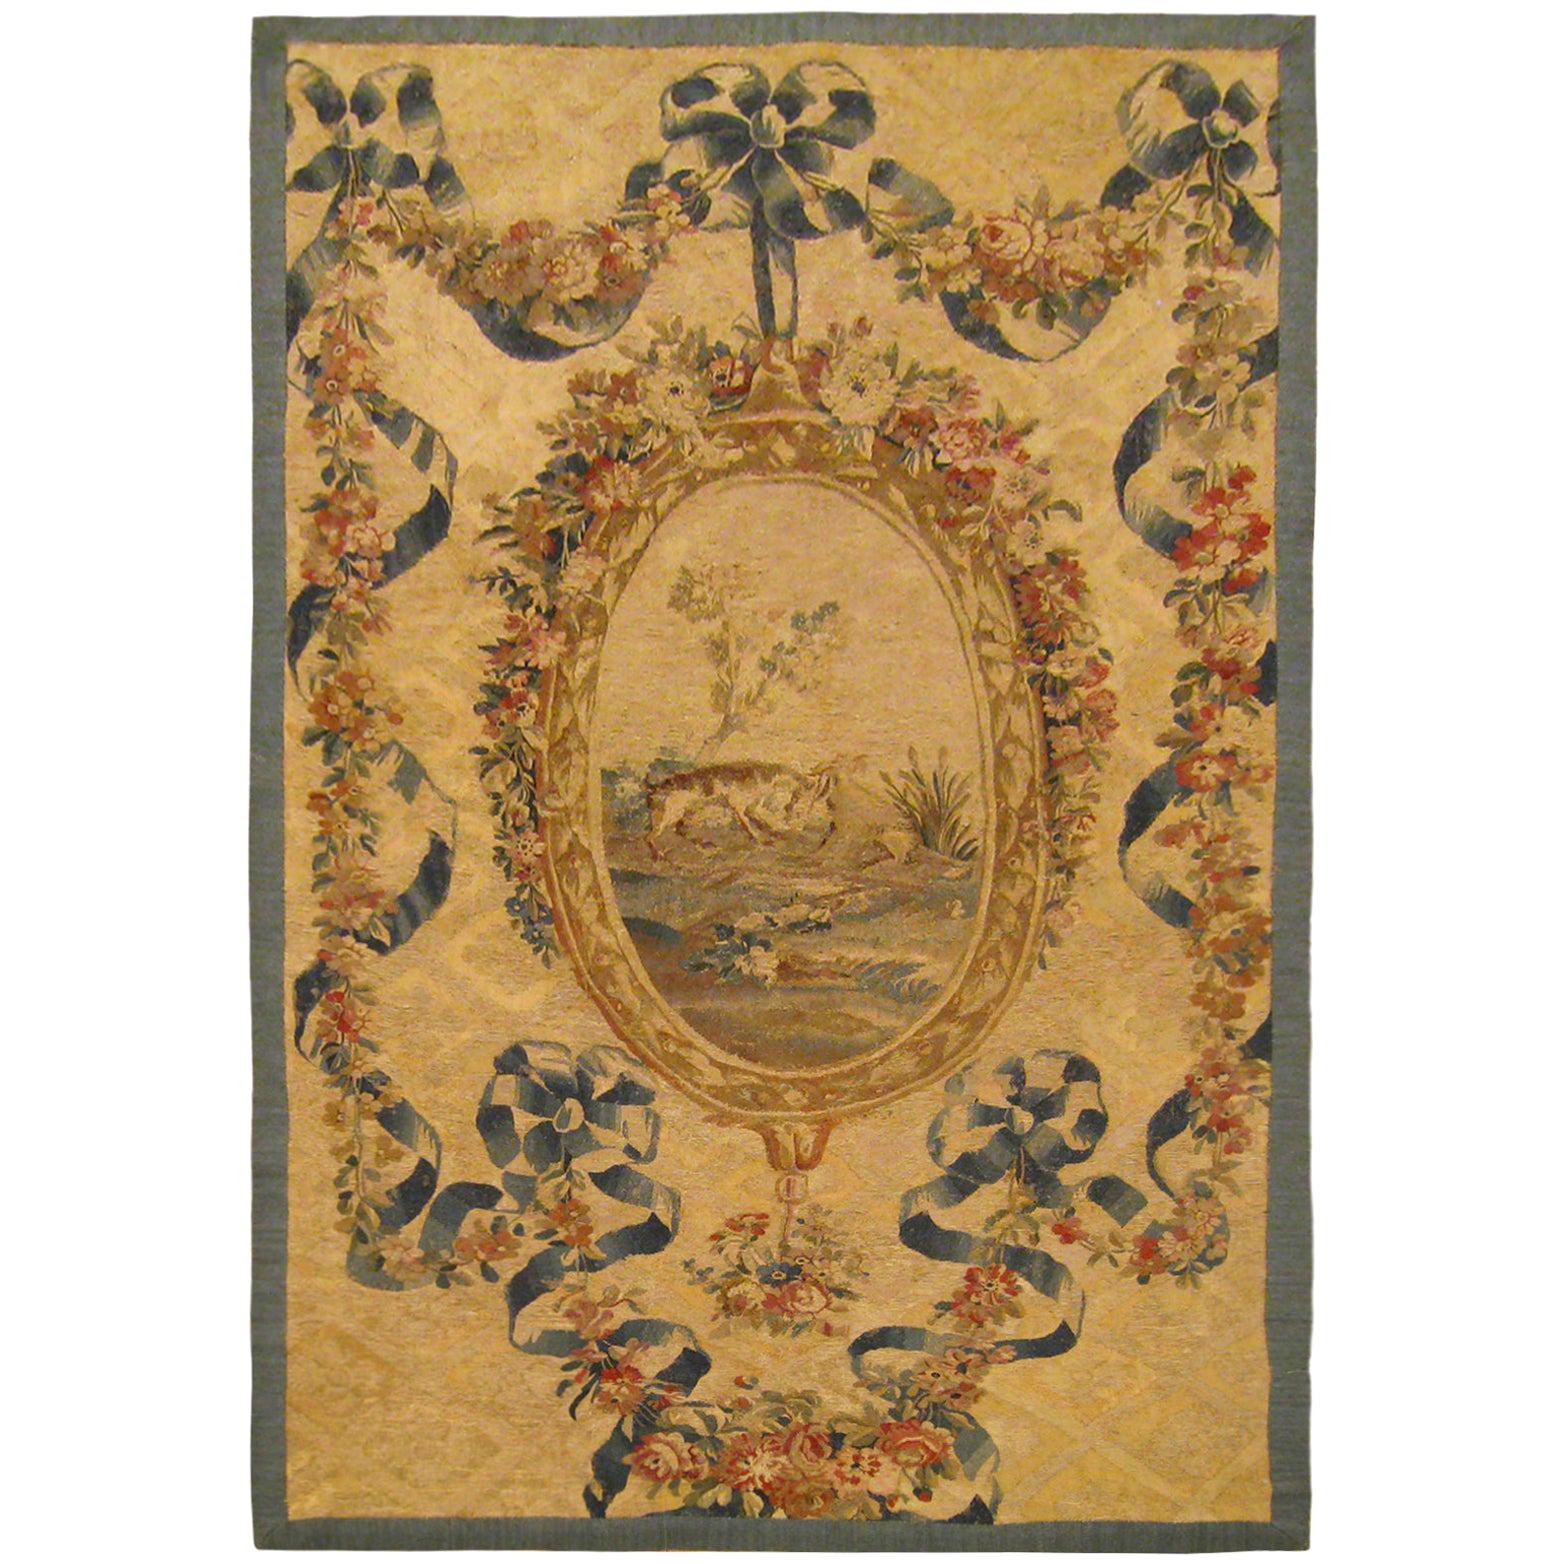 19th Century French Aubusson Needlepoint Tapestry, Ribbon Weave and Pendant